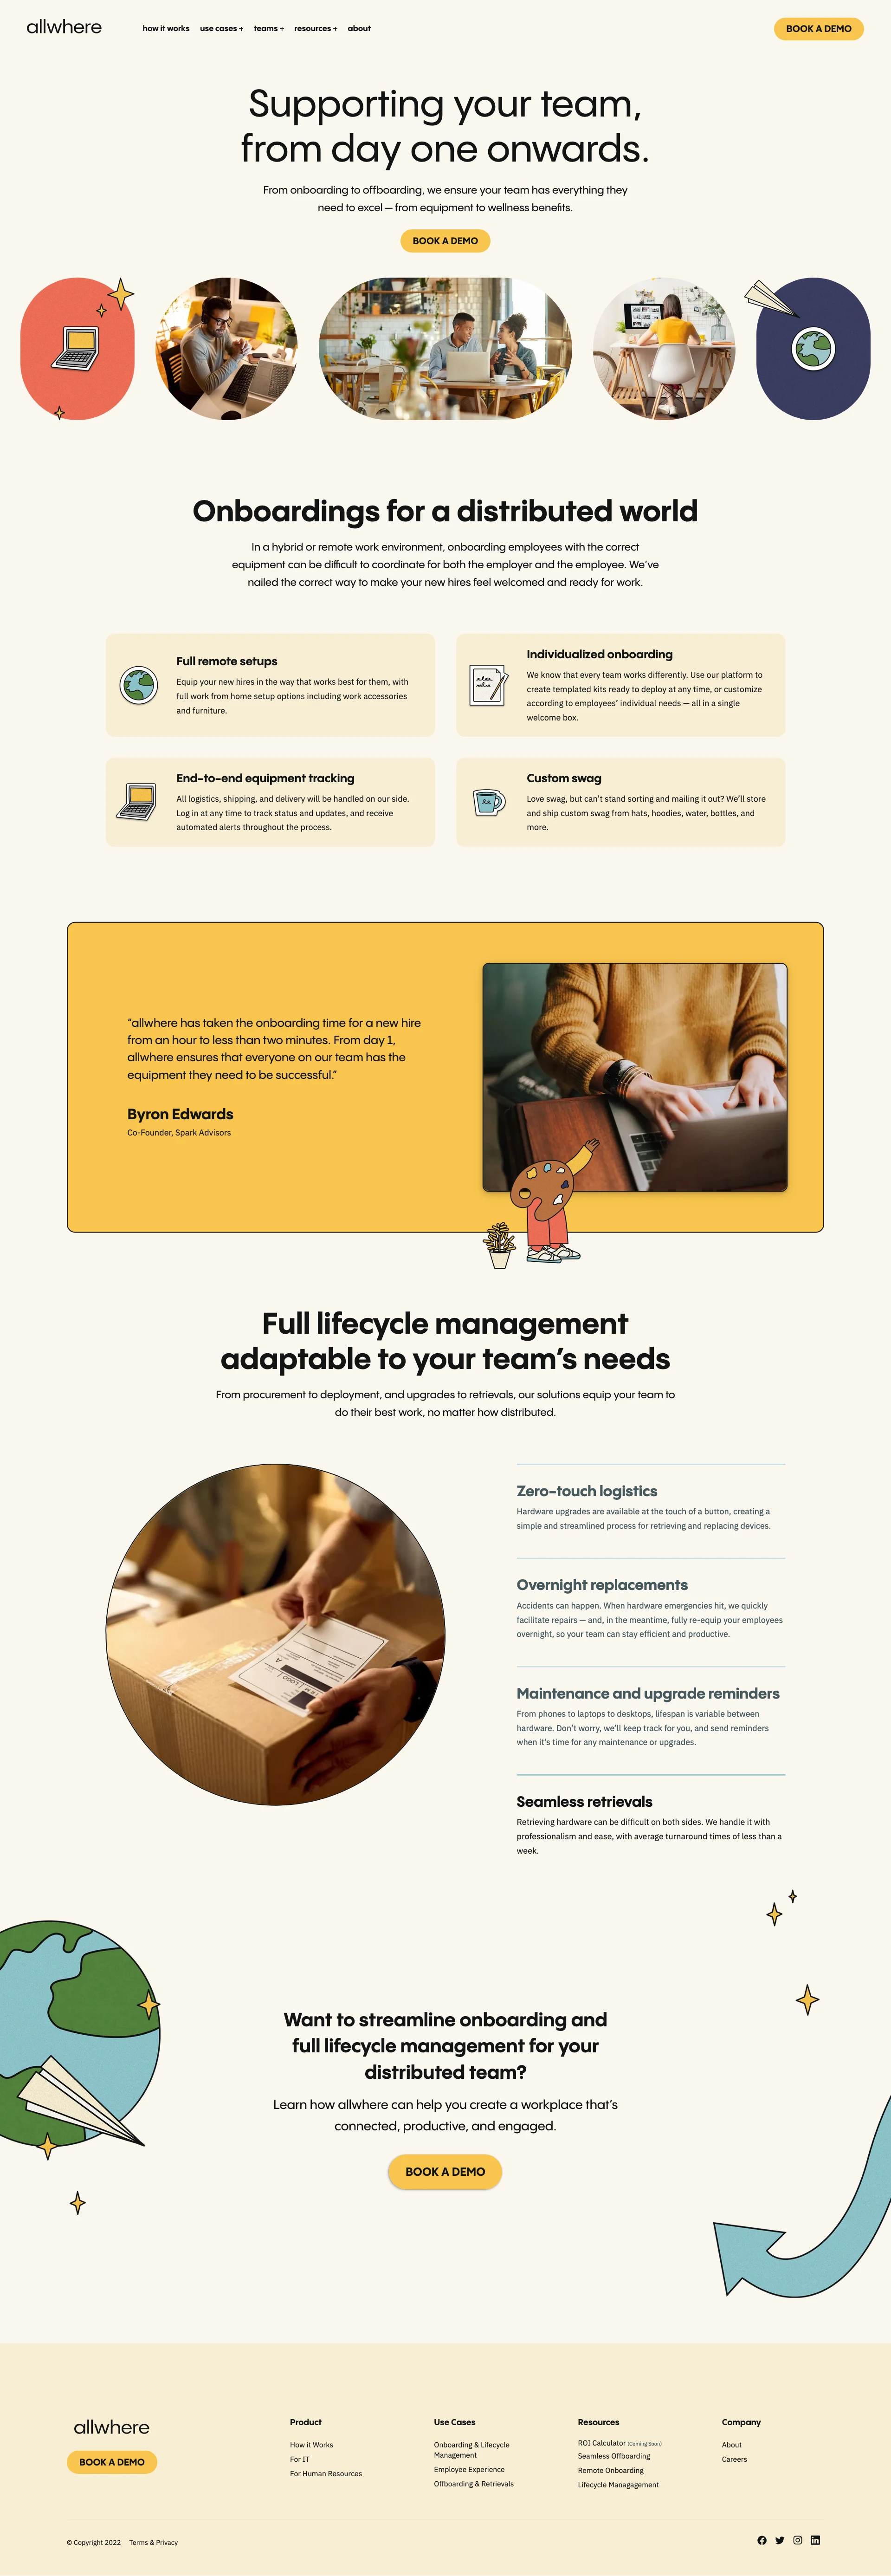 allwhere Landing Page Example: Remote Work Setups For Teams. Everything you need to work from anywhere. Save on time and cost by trusting allwhere with procurement, logistics, and deployment.